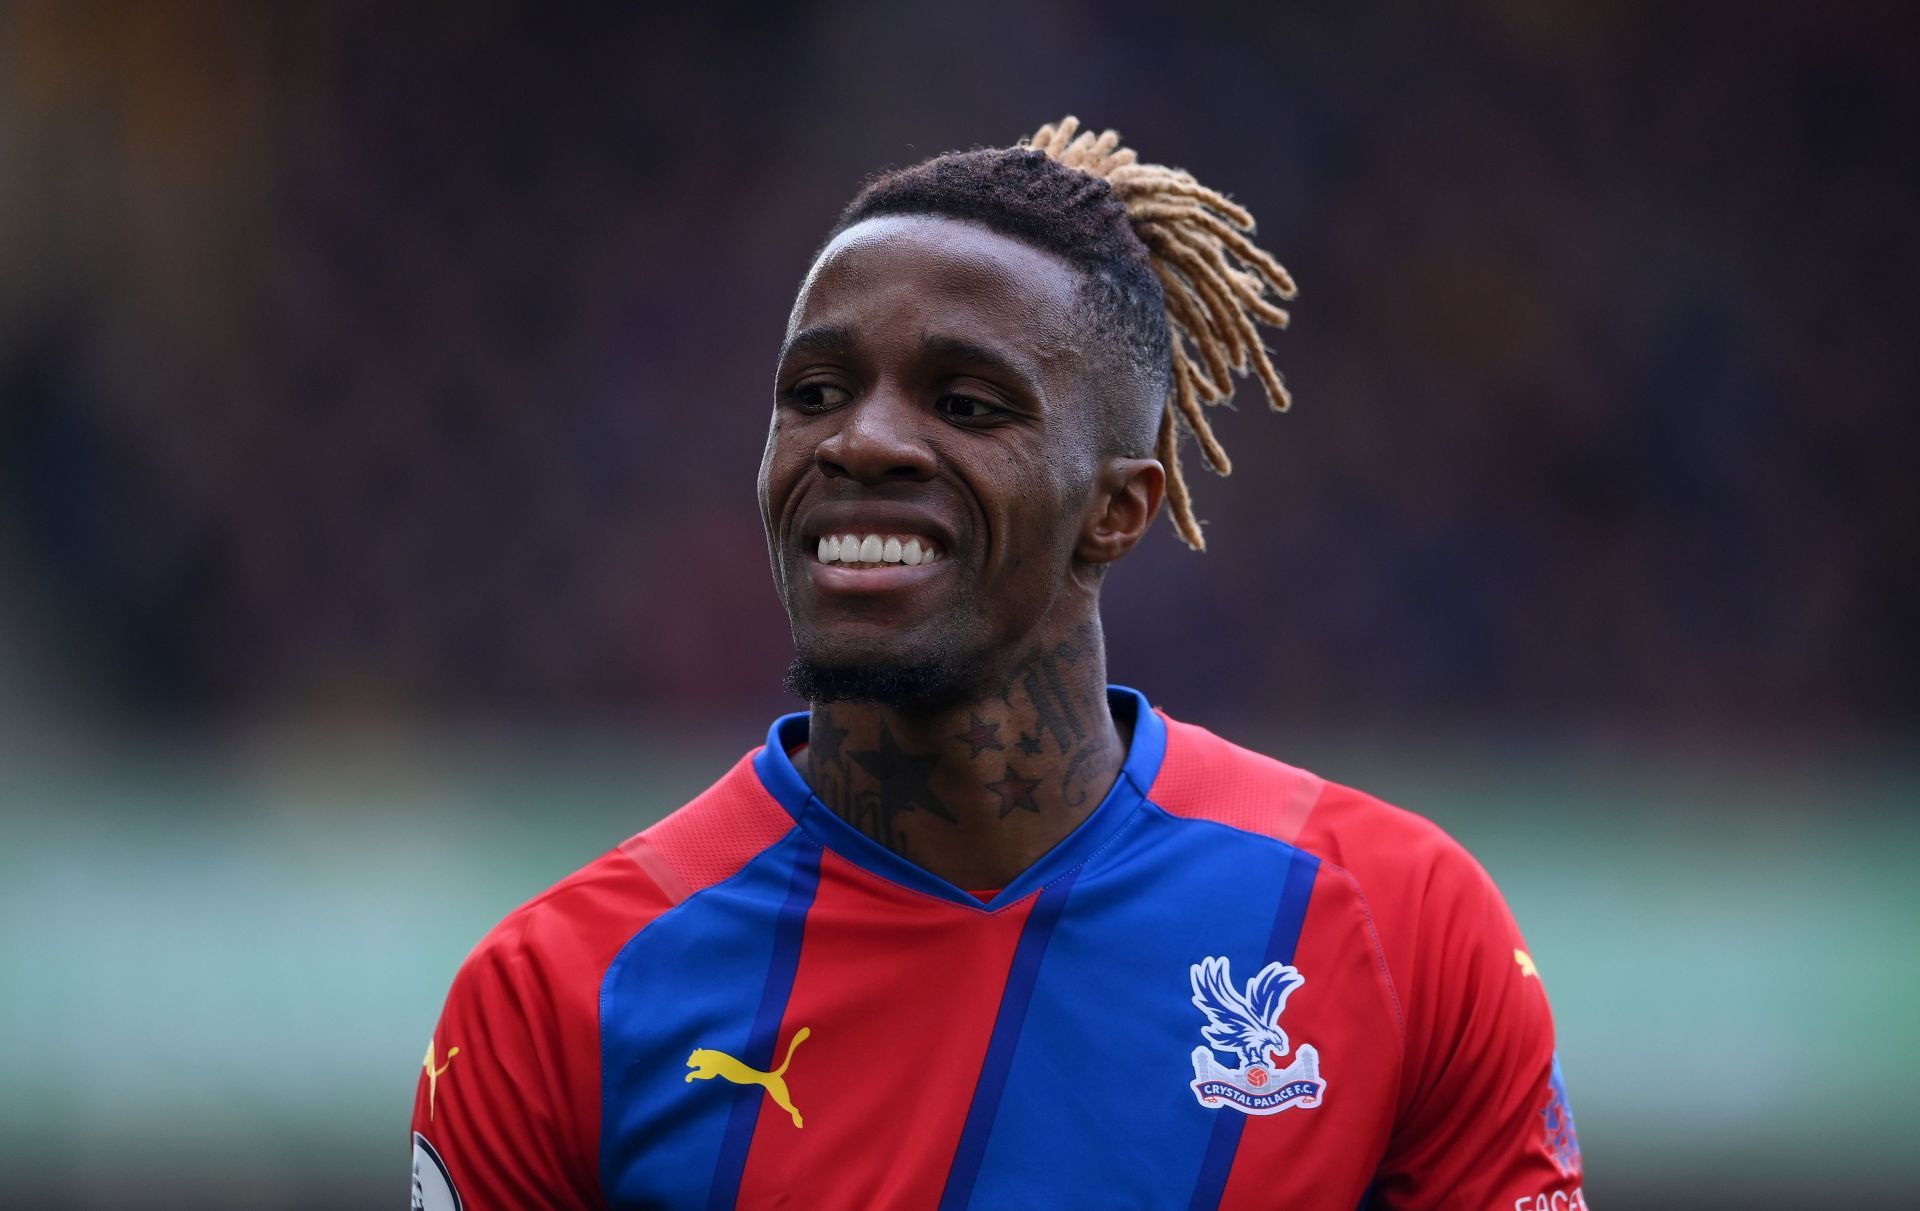 Wilfried Zaha and his bag of tricks never fail to entertain